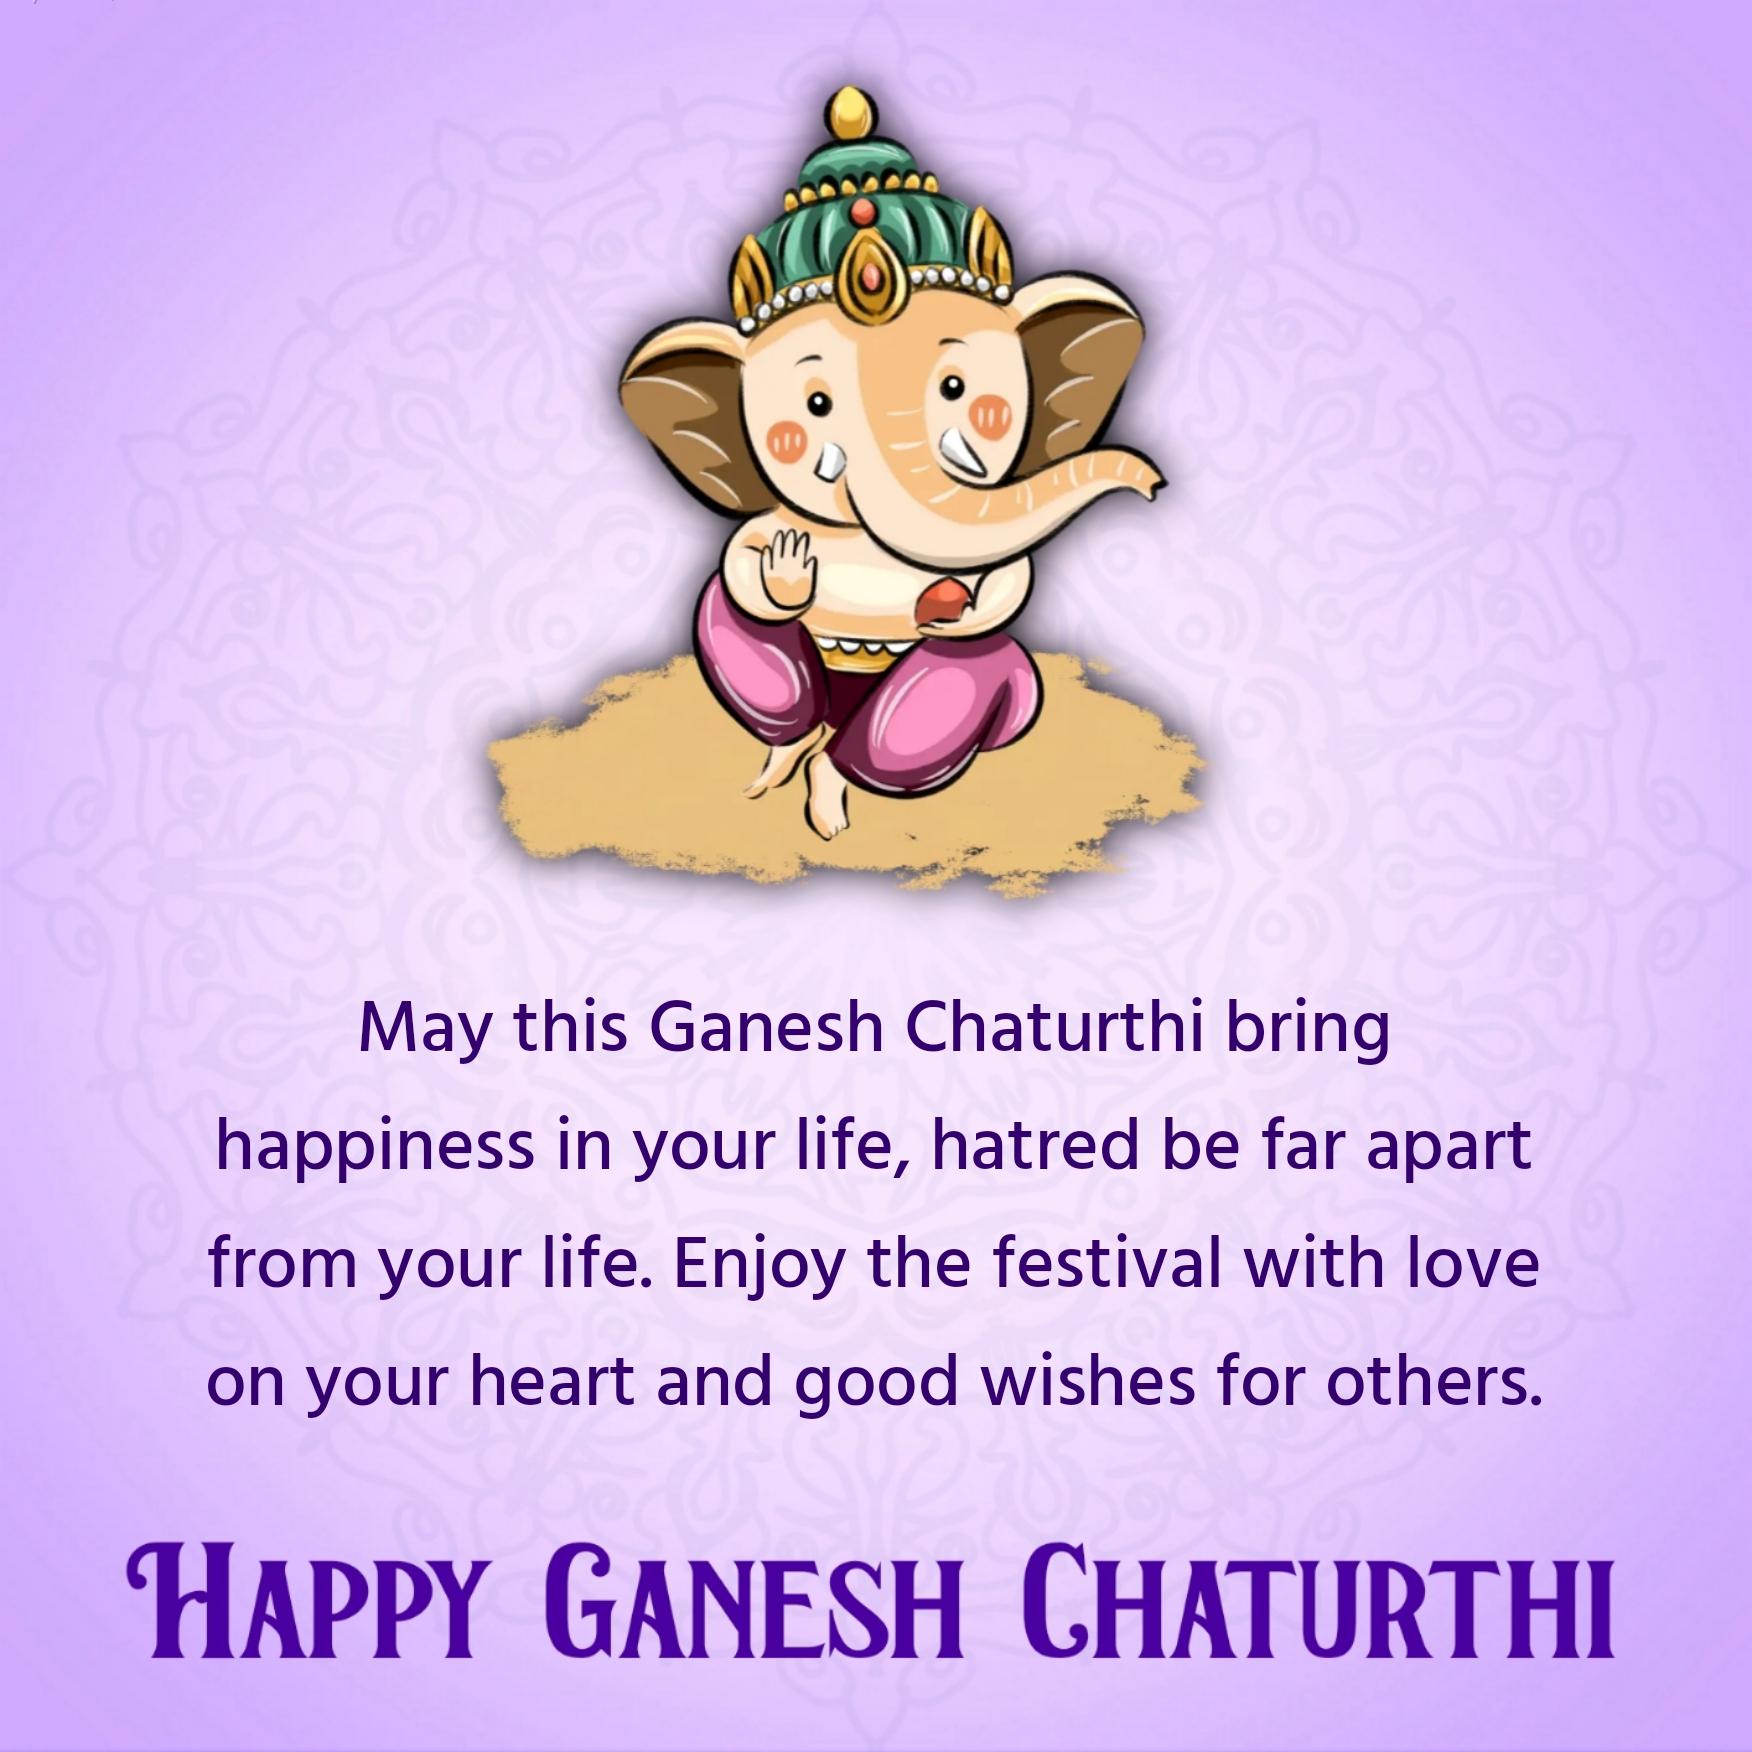 May this Ganesh Chaturthi bring happiness in your life